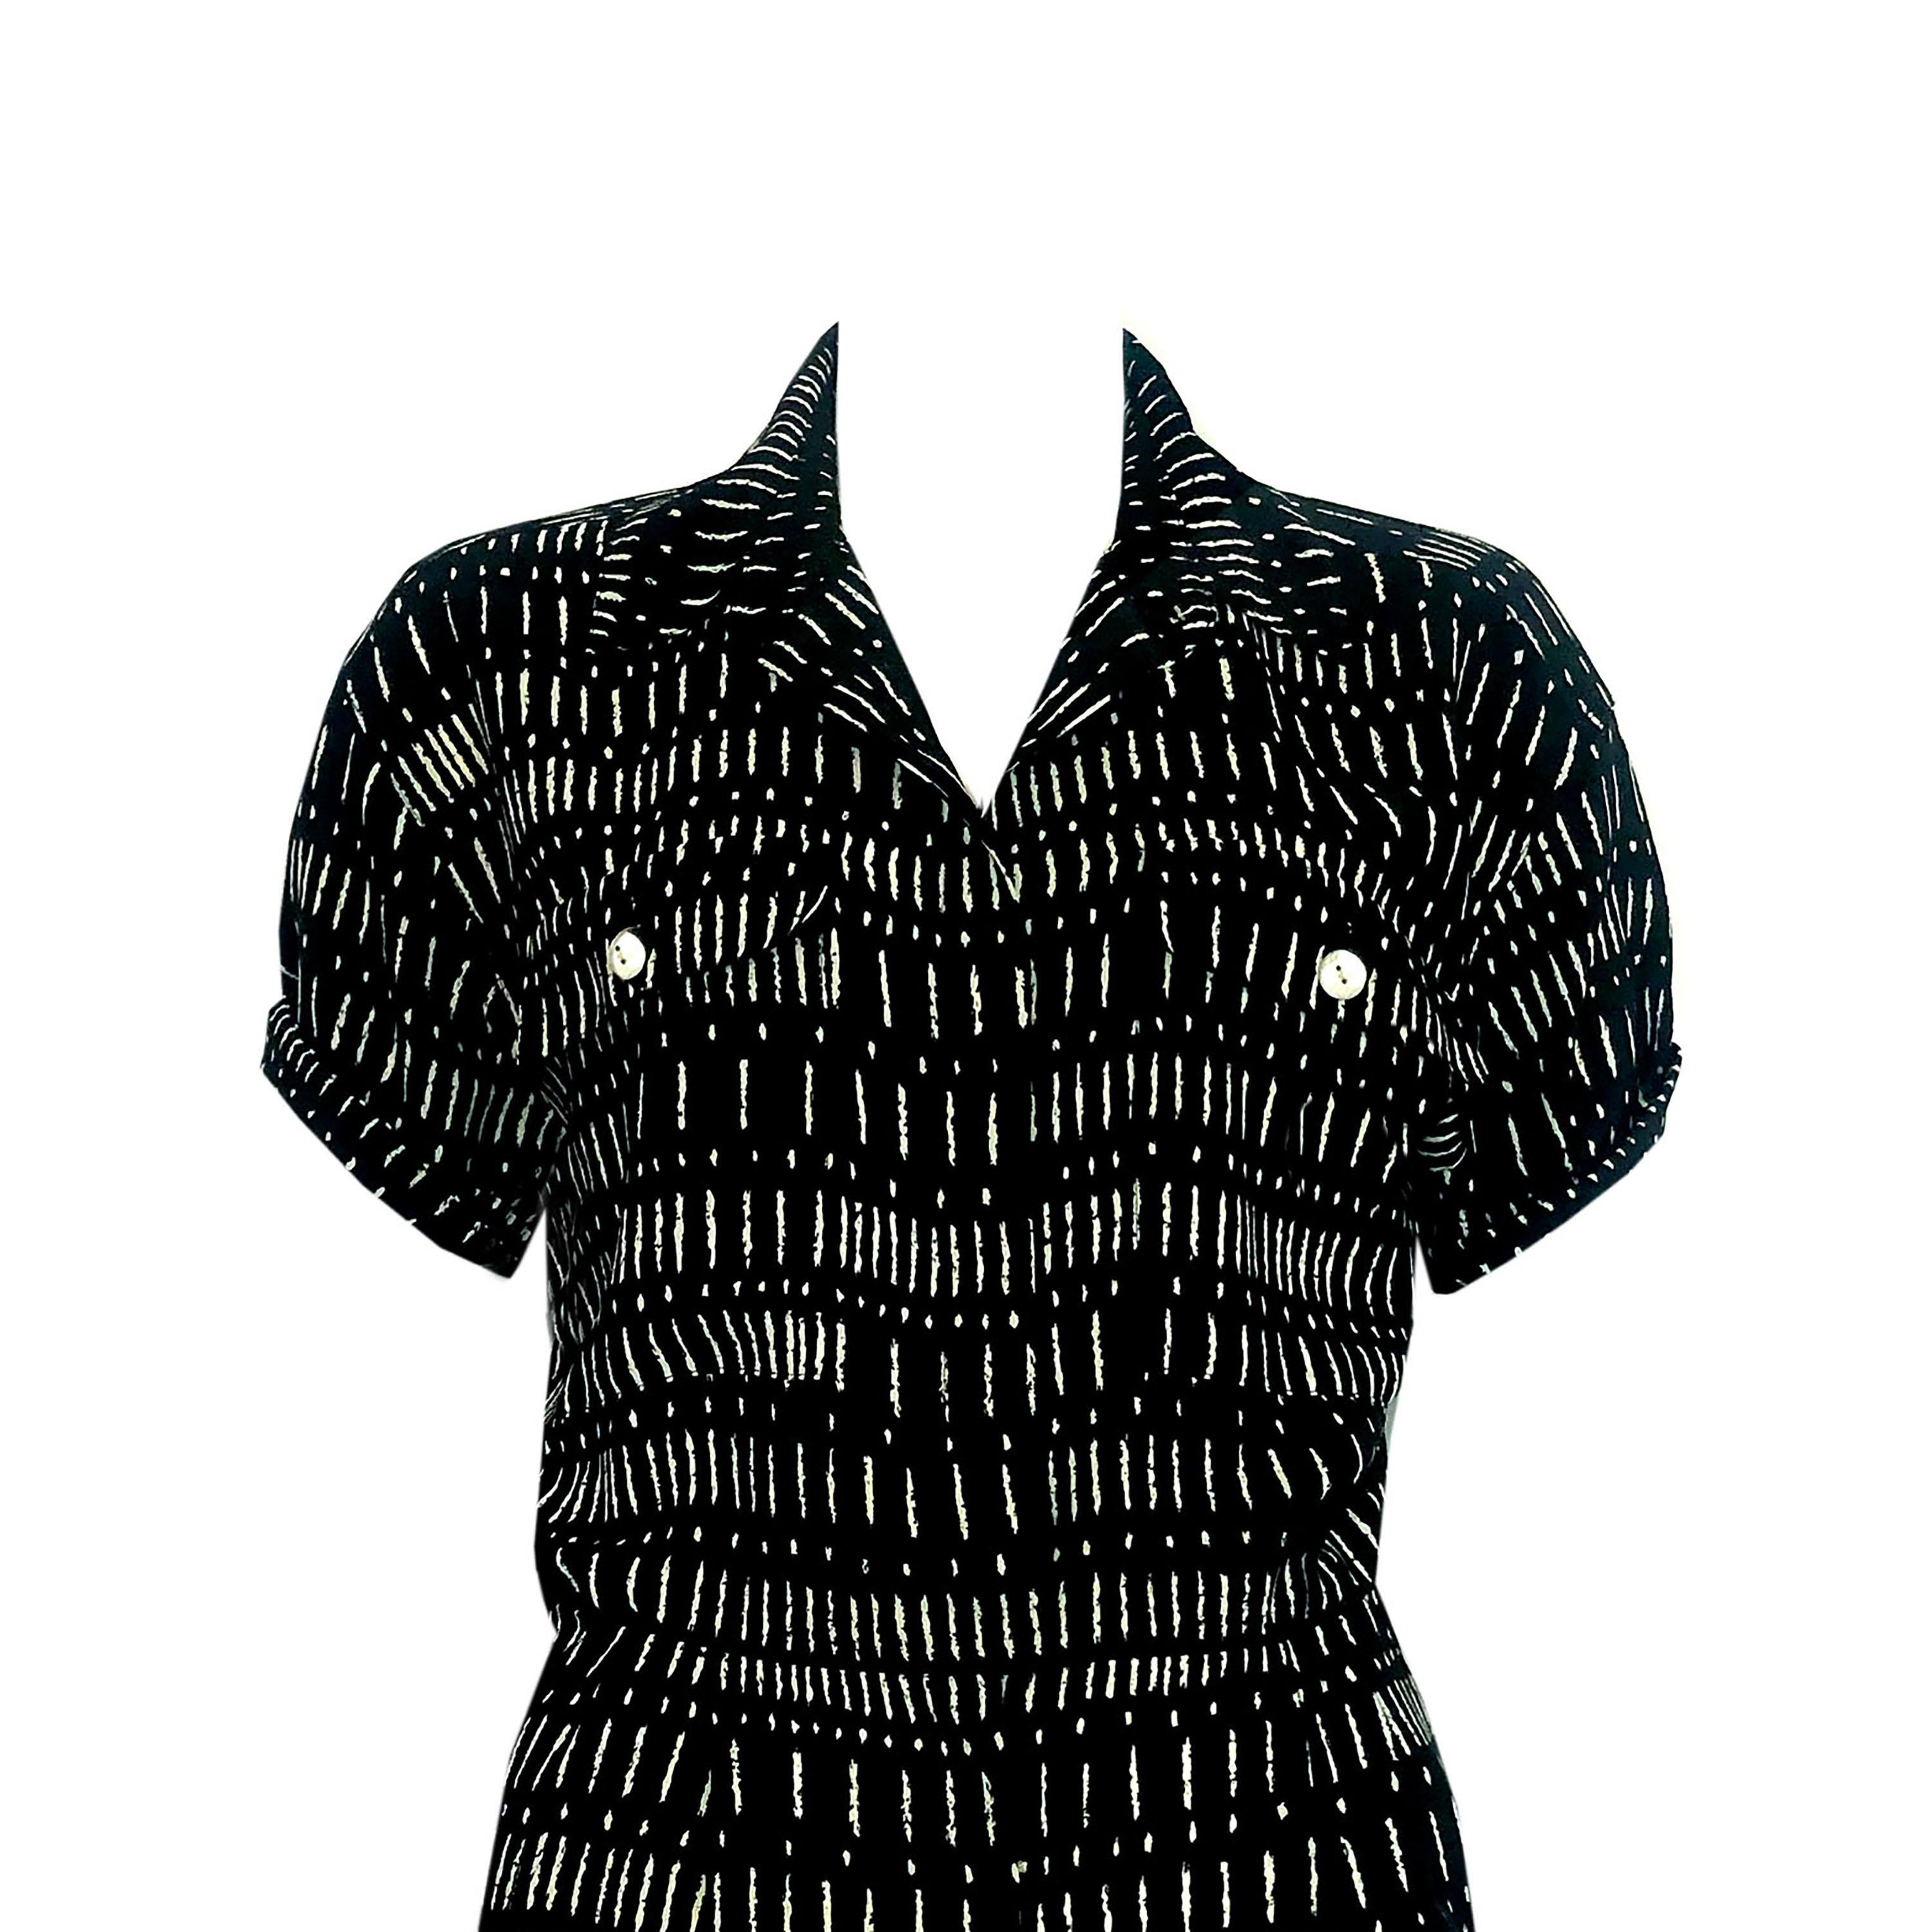 Product details:  1980s Vintage Playsuit - Jumpsuit - Black + White Abstract - Front + Side Pocket Detailing 
Label: Petites for Maggy
Fabric Content: Black + White Abstract Printed Polyester
Size: UK 12 (Fits UK 10 to UK 12)
Bust (Underarm to